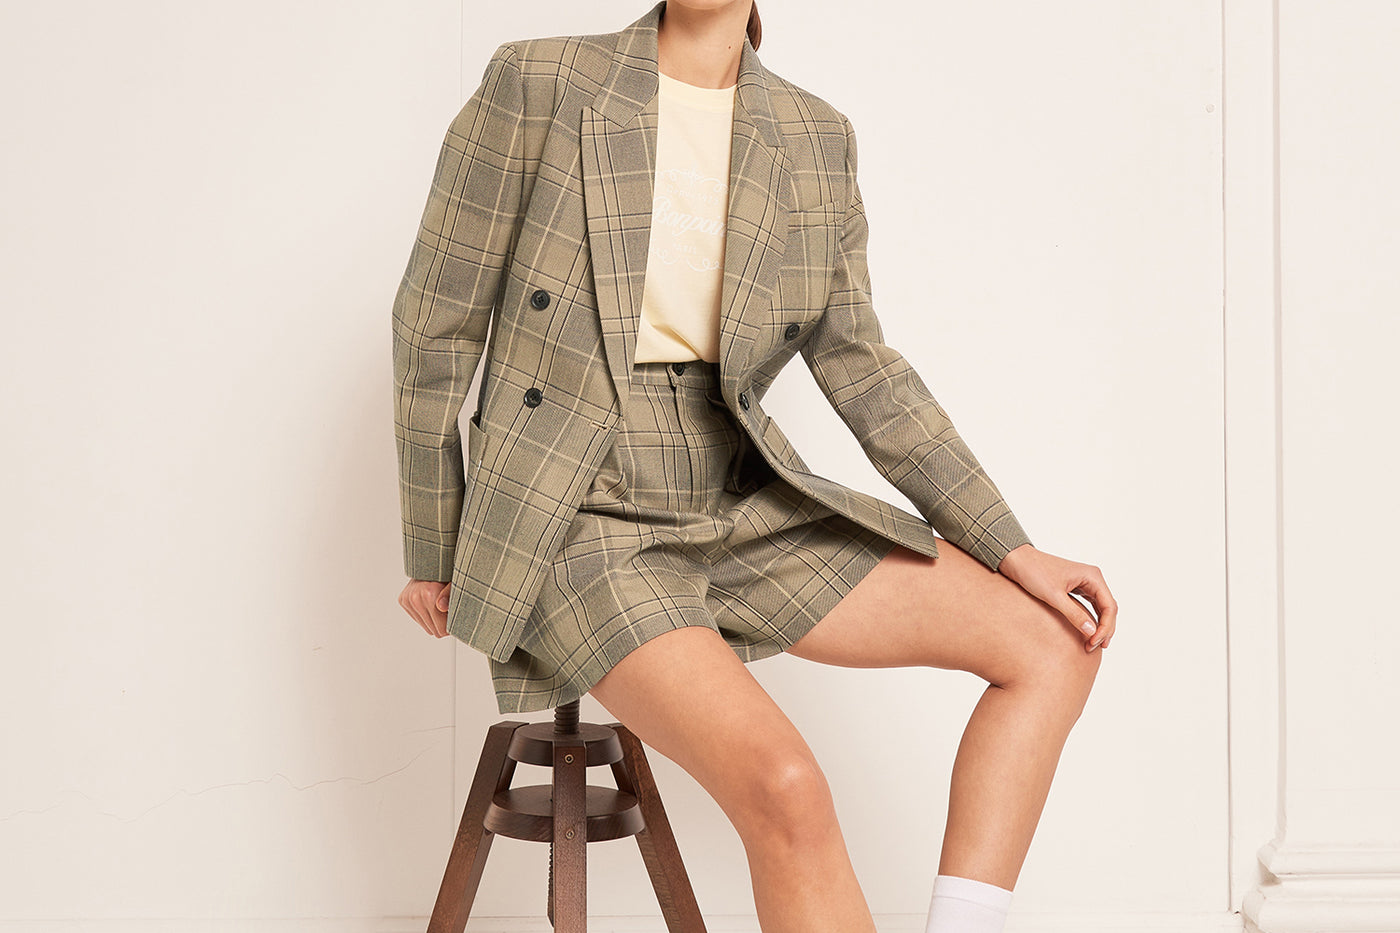 SUMMER 2023 WOMAN'S LOOK CHECKERED JACKET